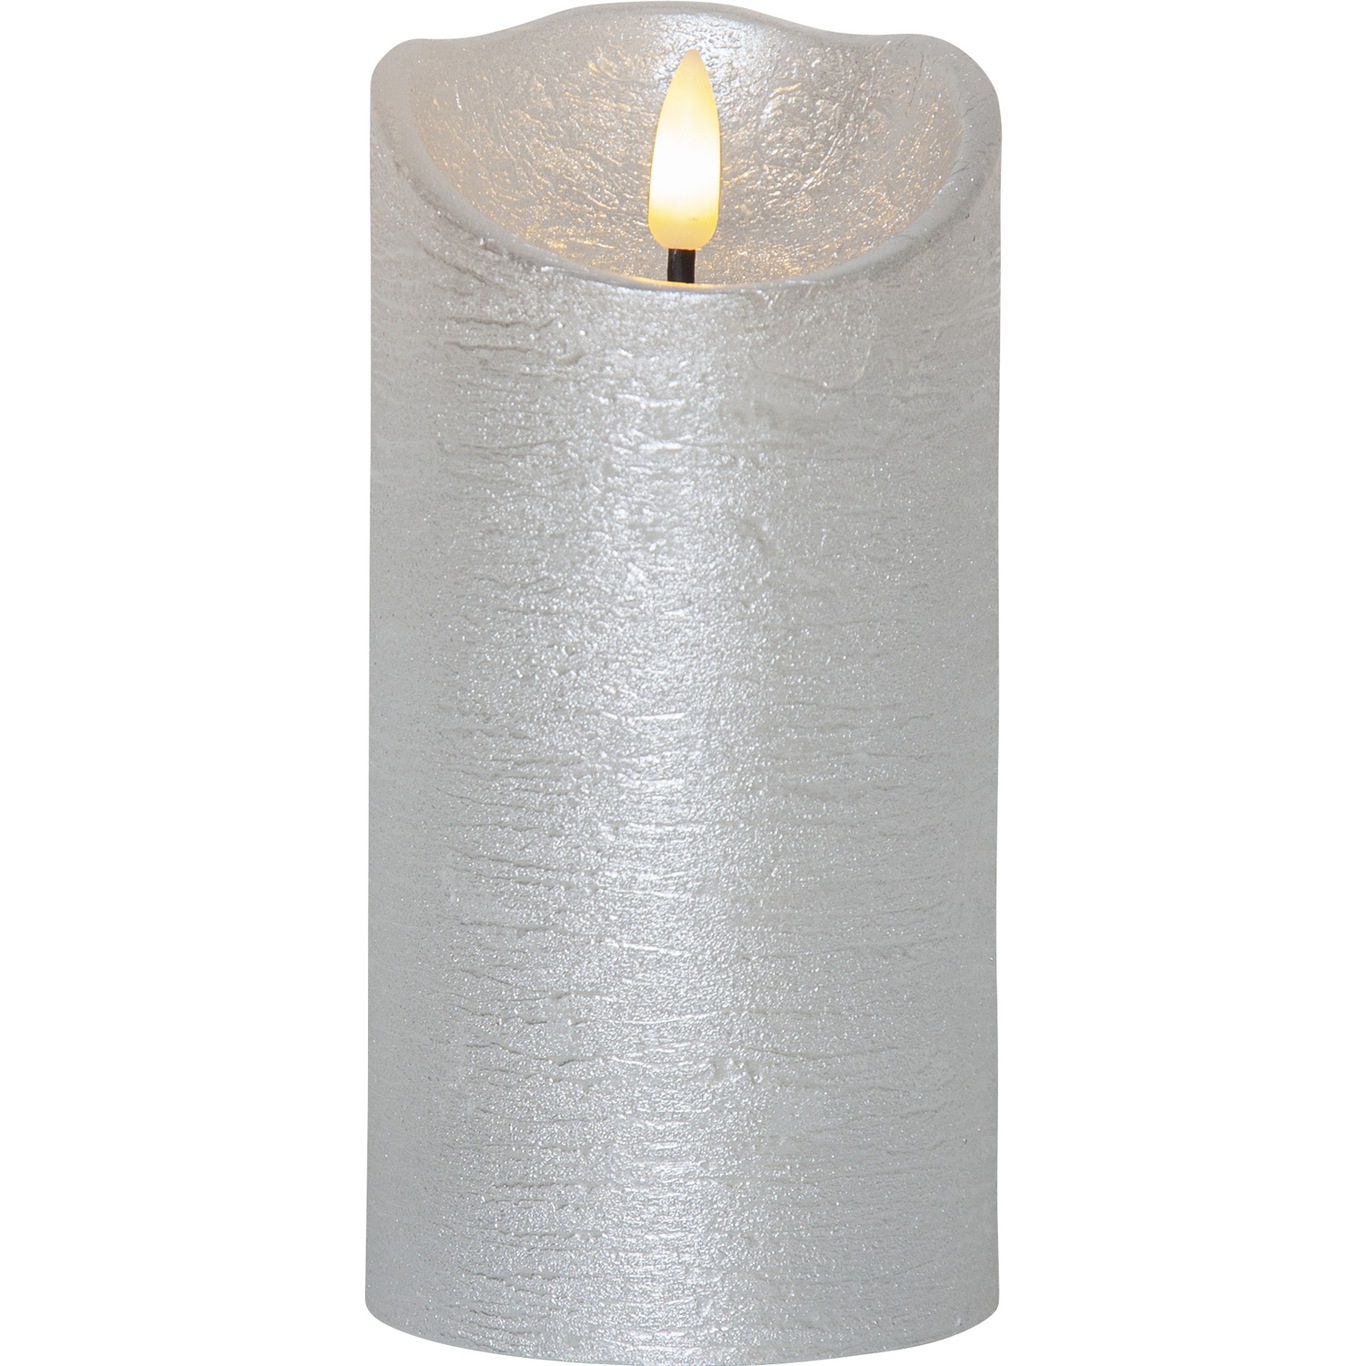 Flamme Rustic LED Pillar Candle Silver, 15 cm